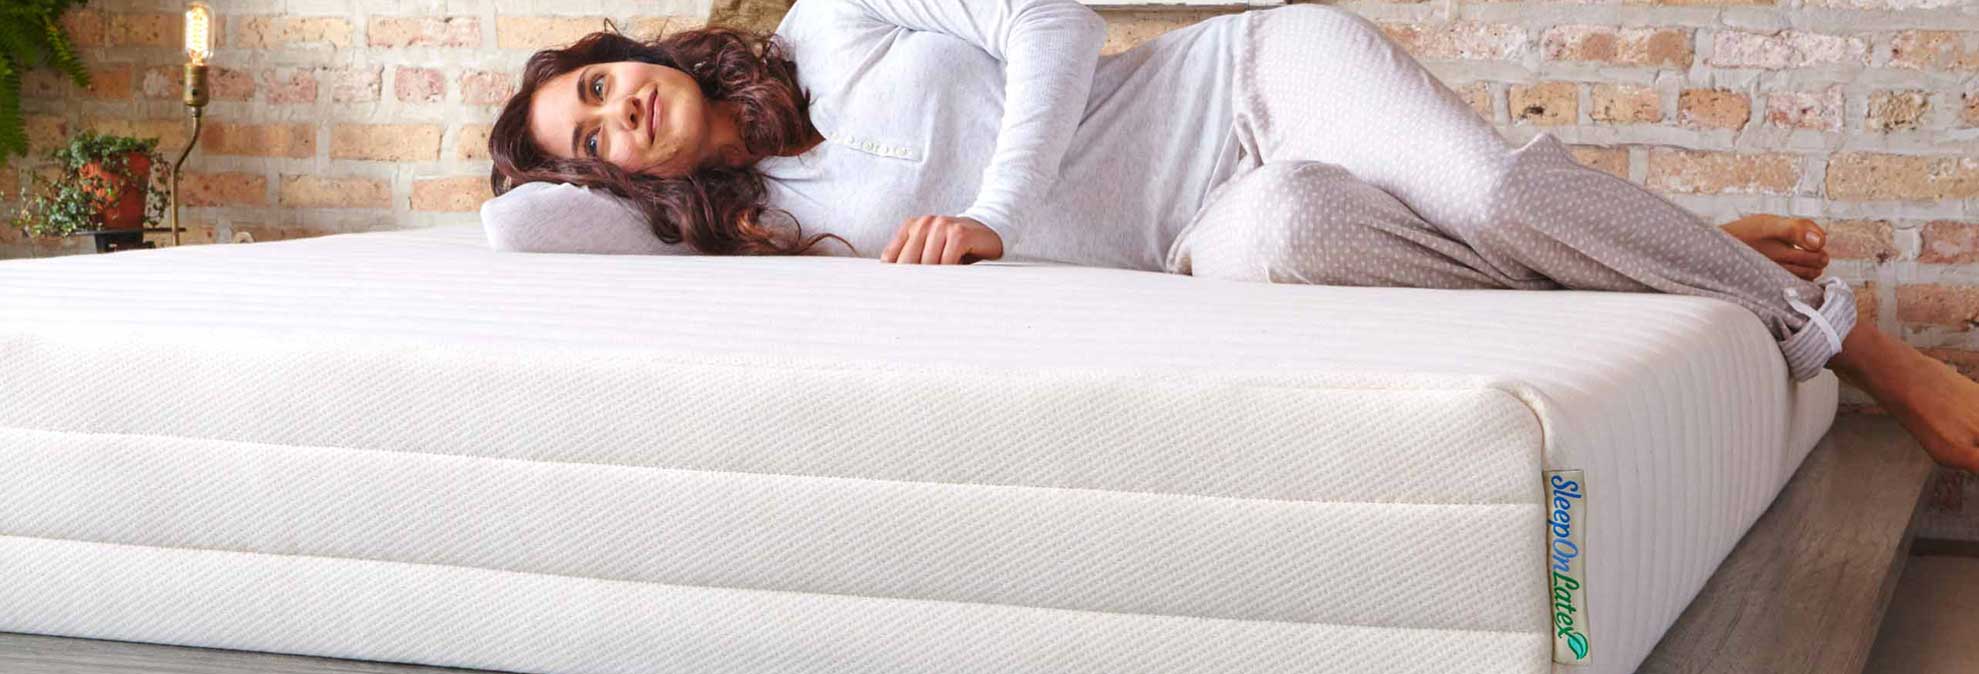 best mattress protector consumer reports cotton